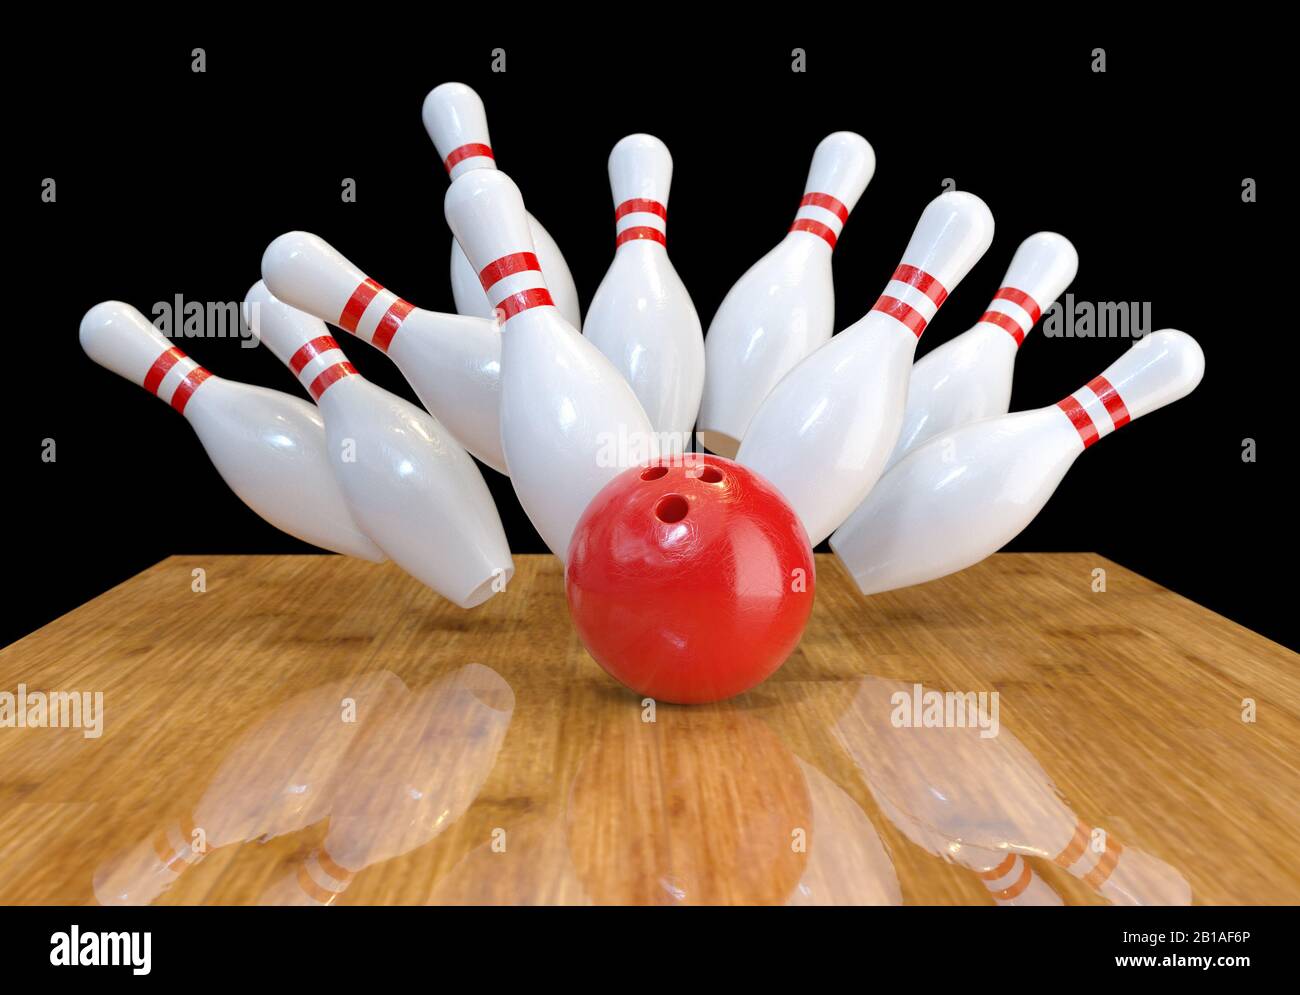 Image of scattered skittles and bowling ball on wooden floor, 3d rendering  Stock Photo - Alamy